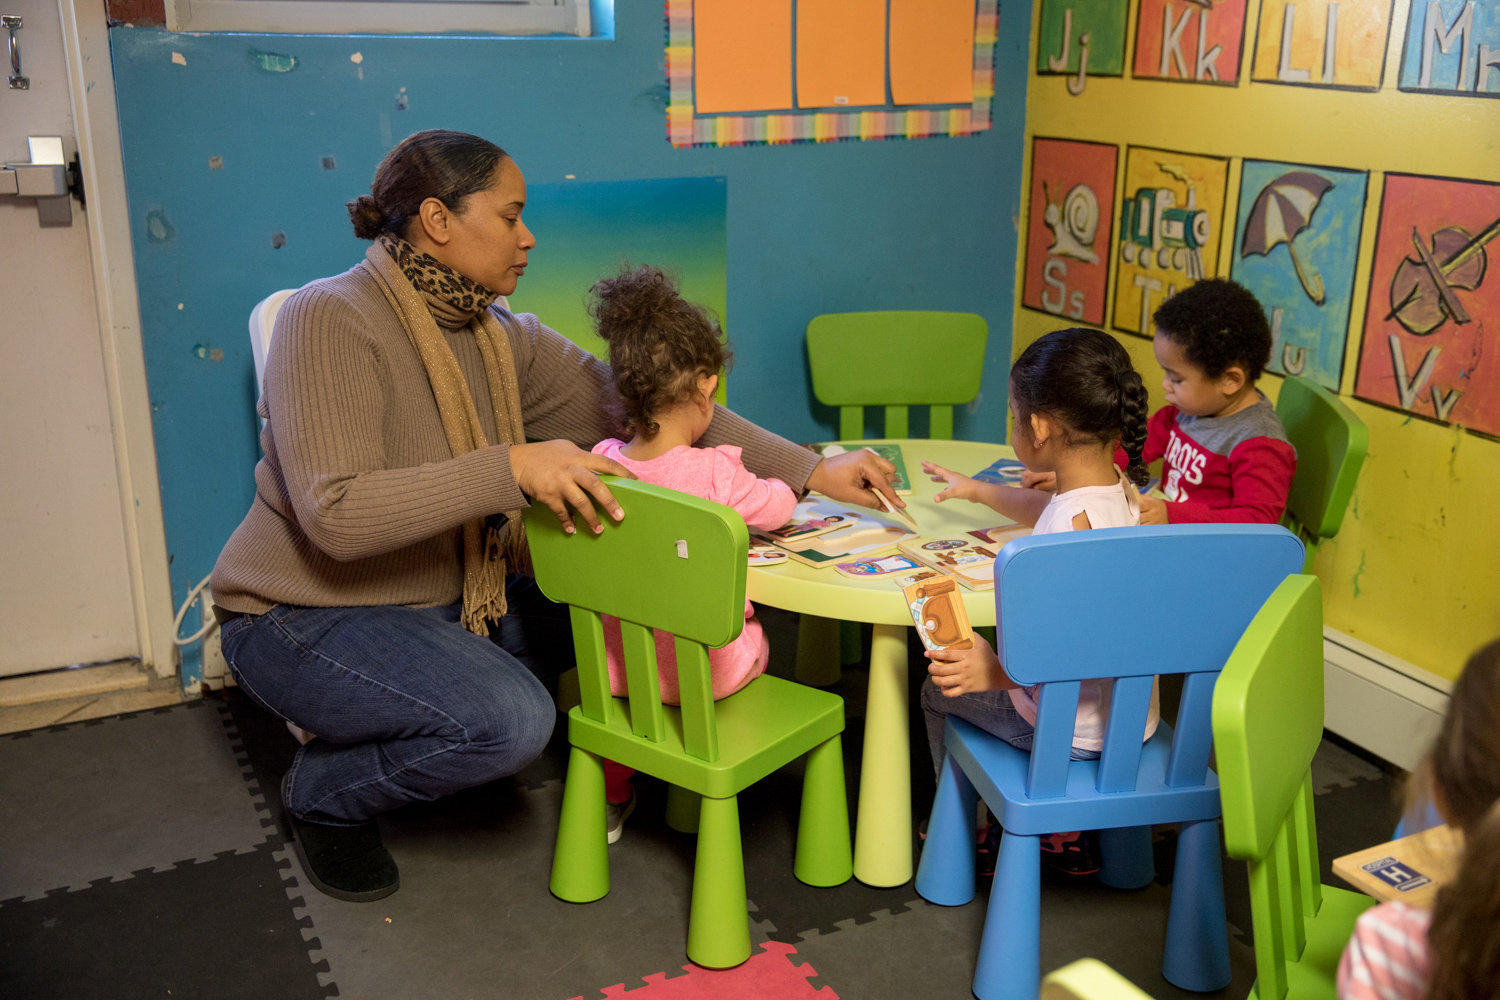 Michelle Weiss helps children work through puzzles at Rodi Daycare Center on Netherland Avenue. Despite the high price of child care citywide, Rodica Chiacu, the center’s owner, has worked to keep her rates affordable for parents.